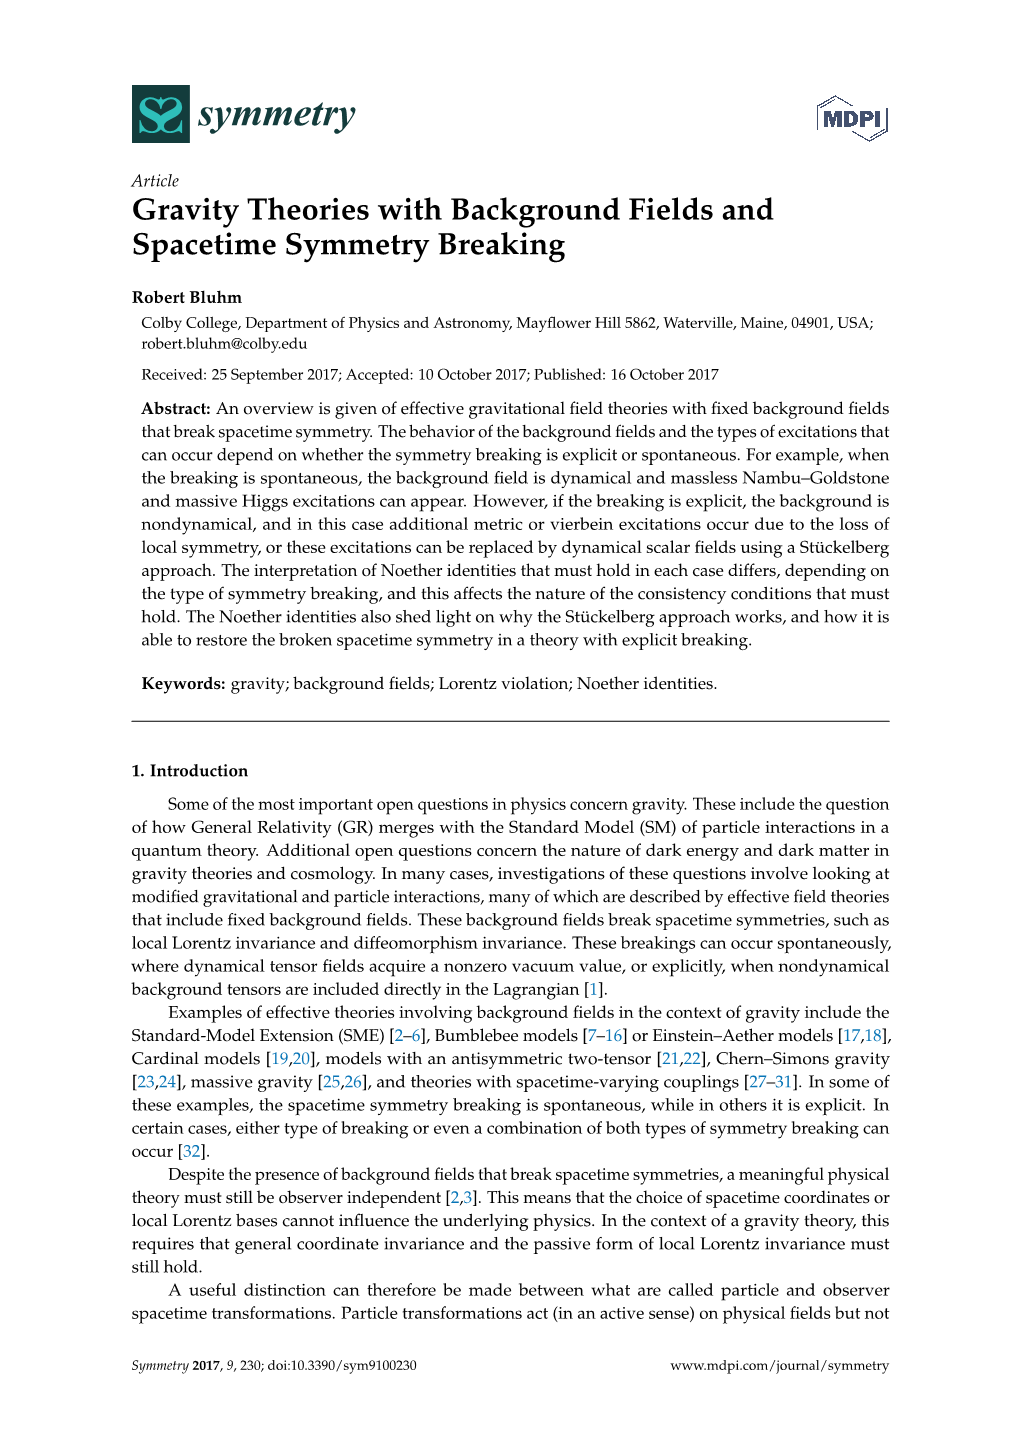 Gravity Theories with Background Fields and Spacetime Symmetry Breaking